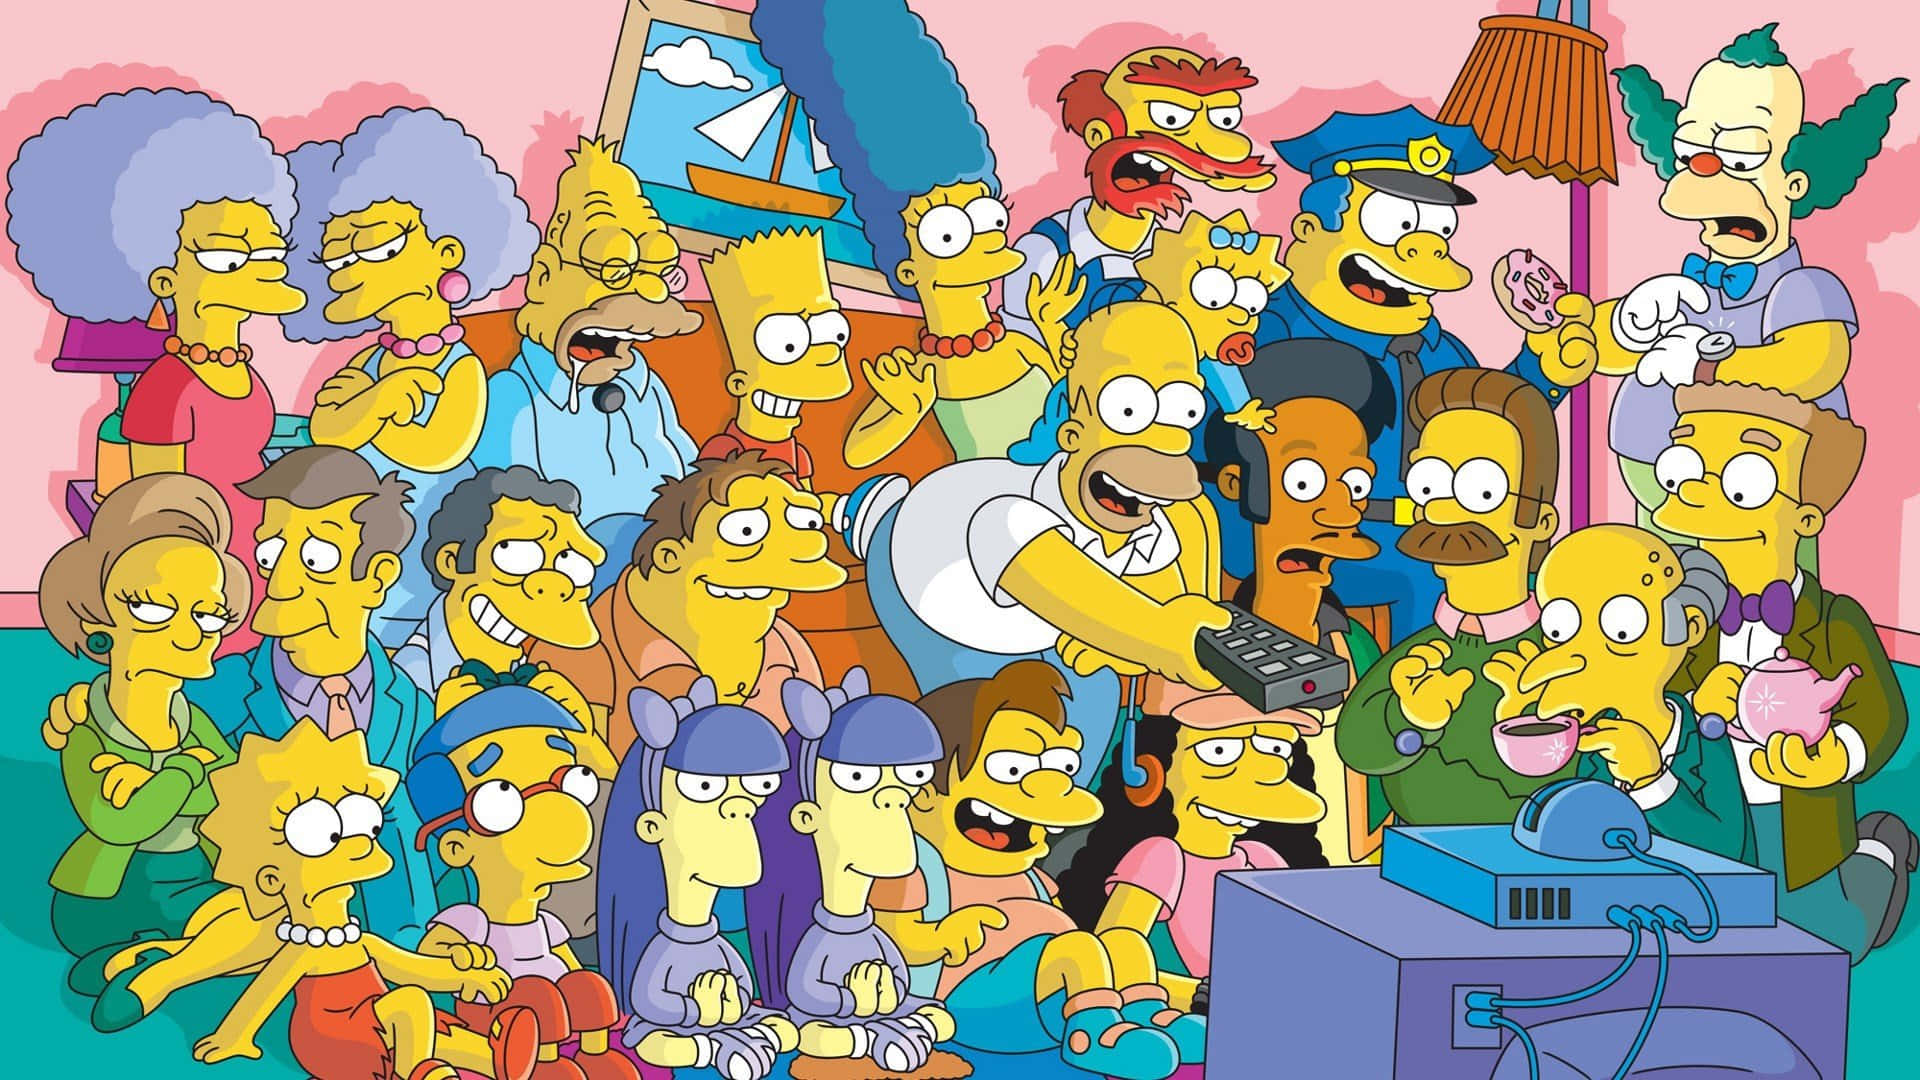 The Iconic Simpsons Family